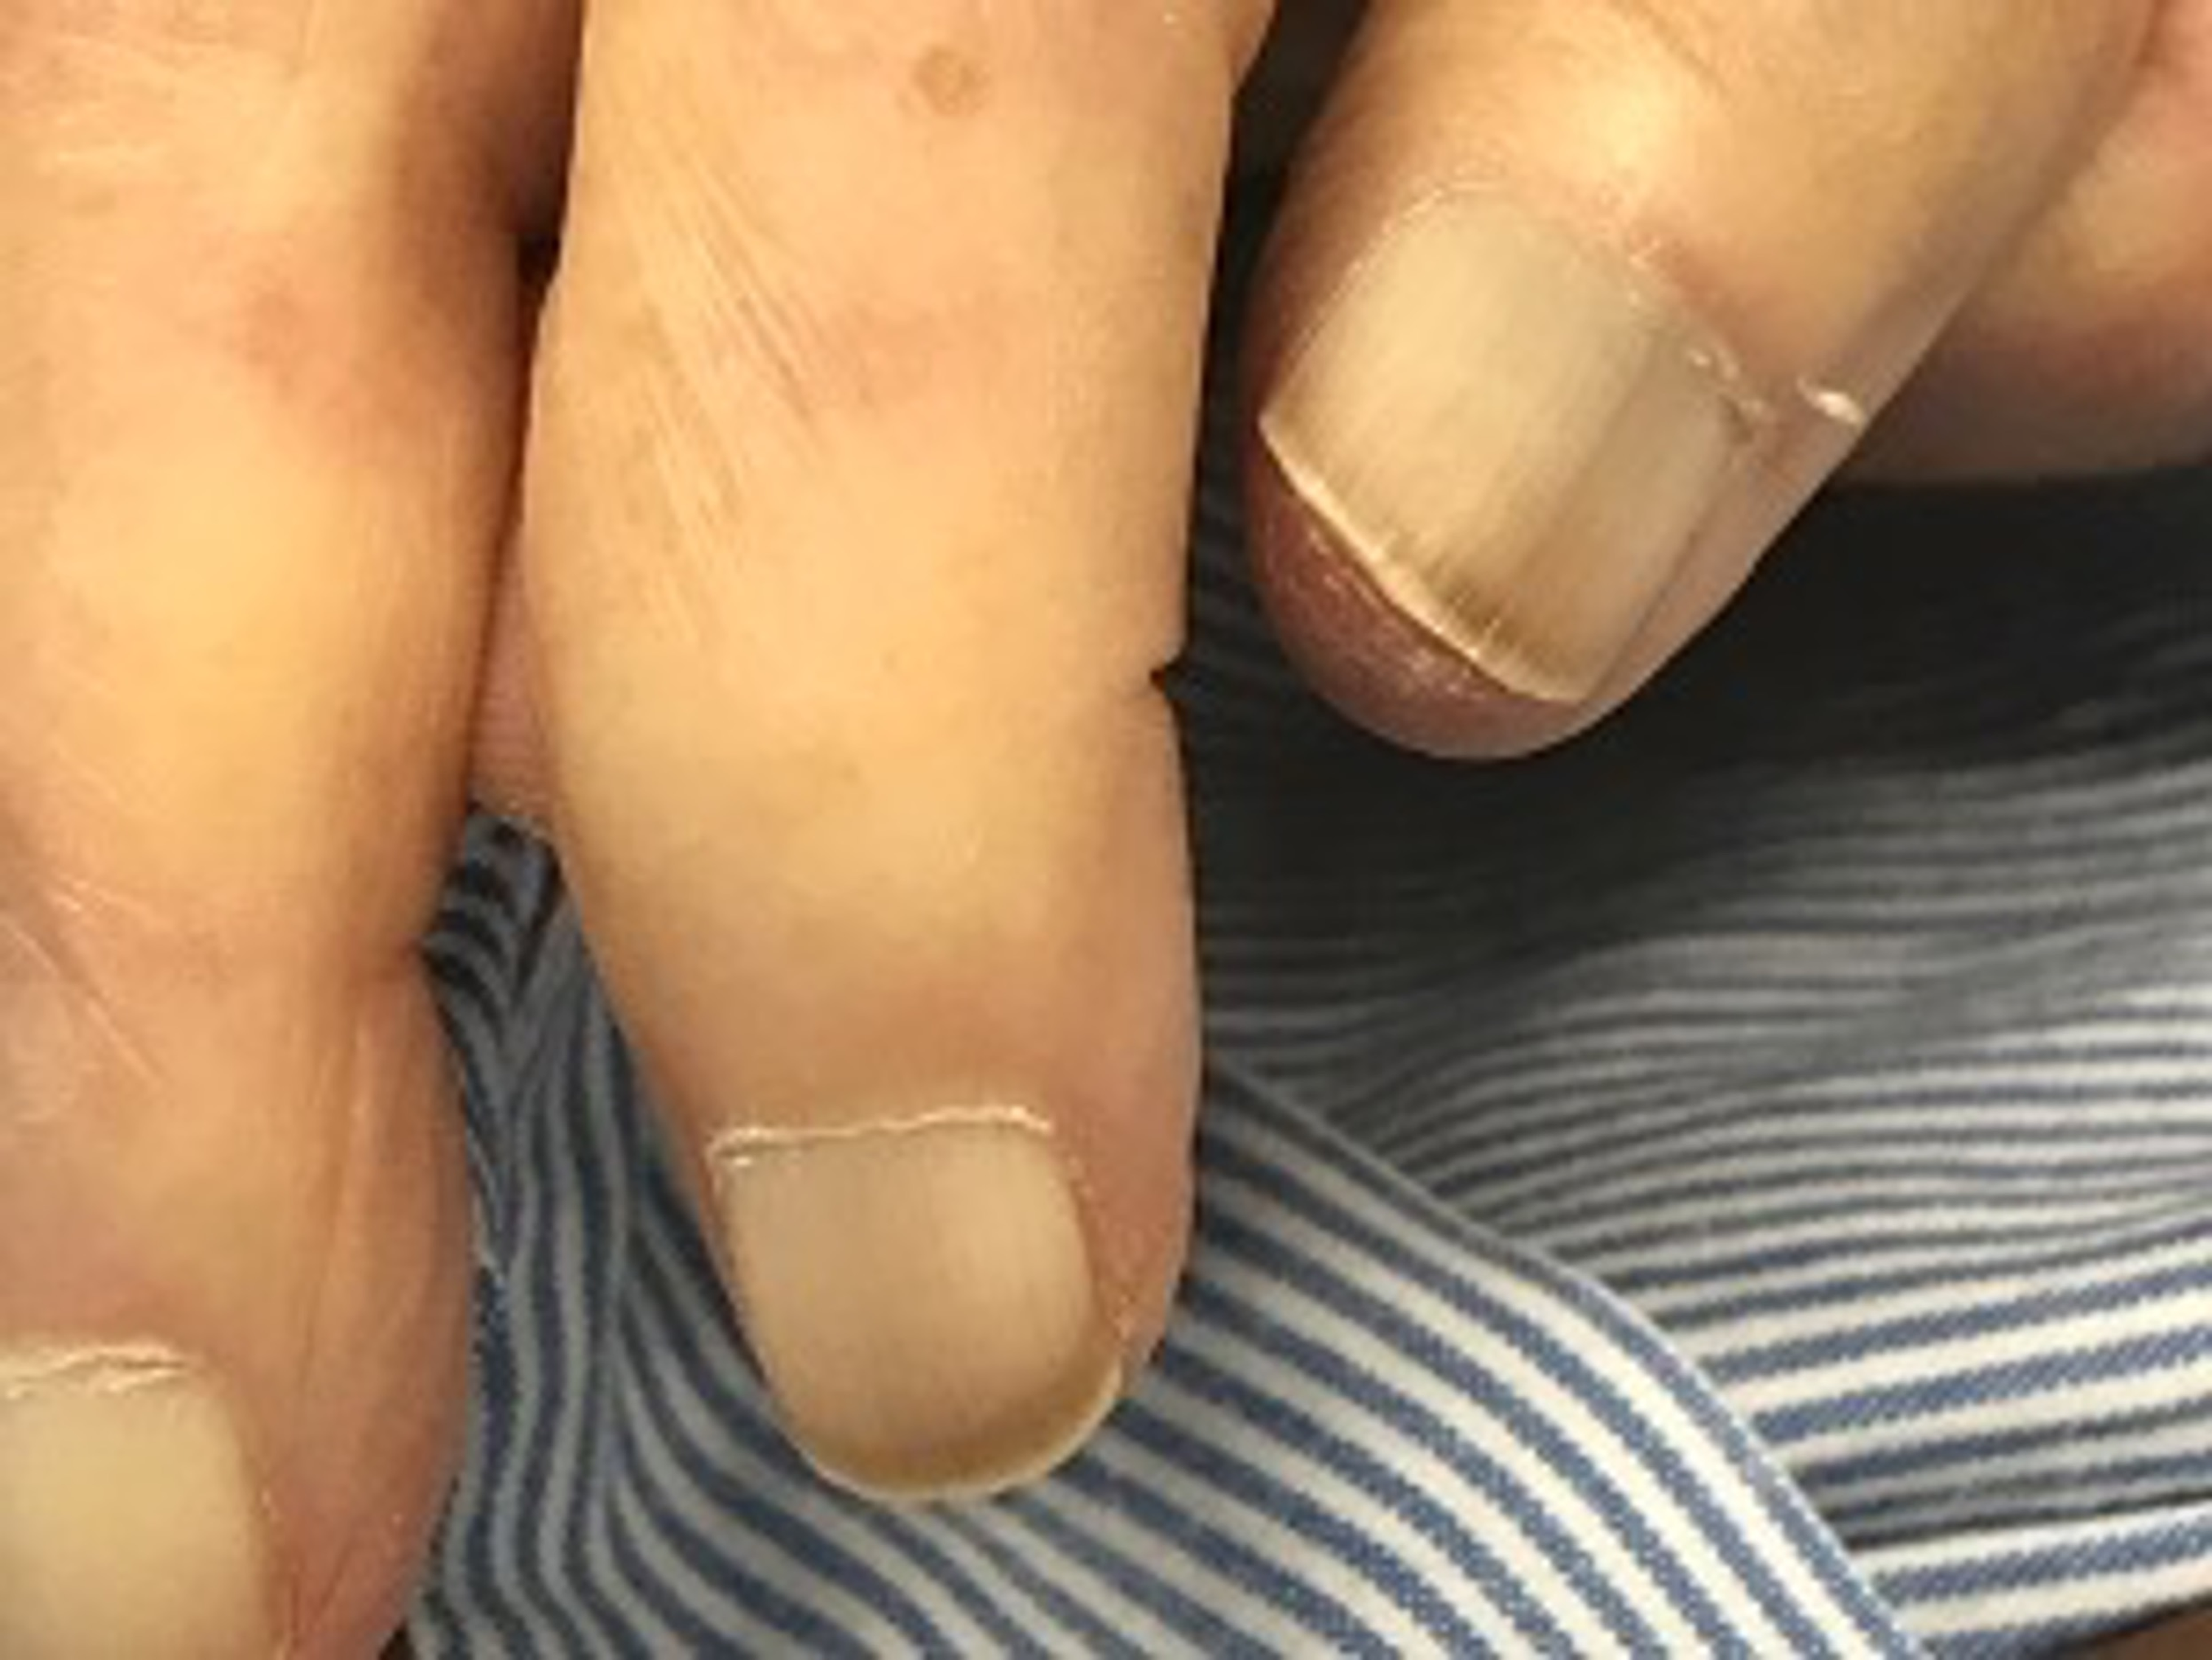 Cureus | The Relationship Between the Presence of White Nails and  Readmission Among Rural Older Admitted Patients: A Prospective Cohort Study  | Article